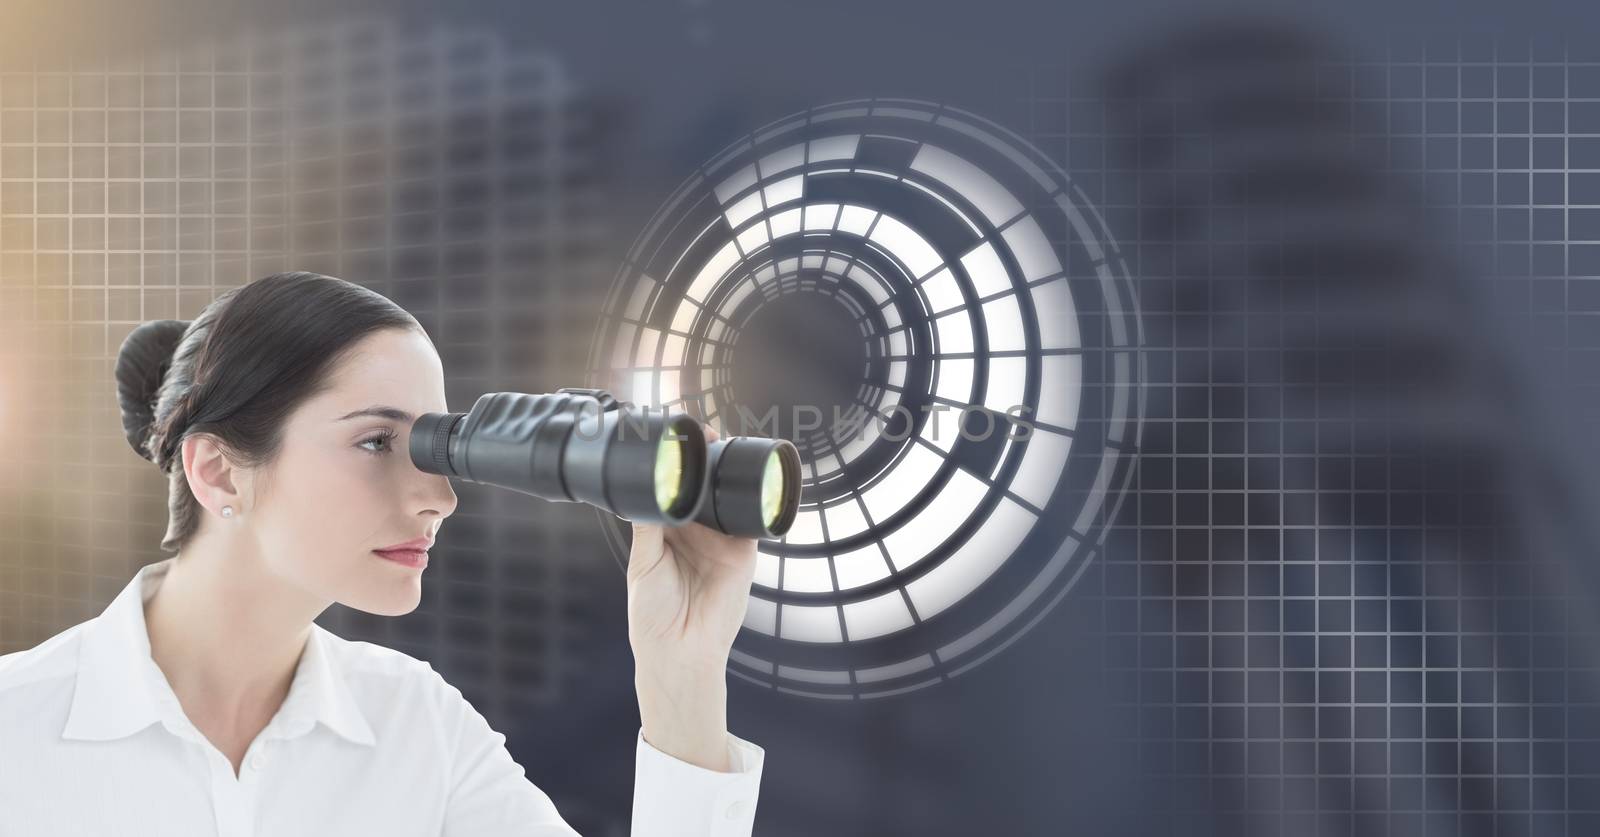 Digital composite of Woman with binoculars and Glowing circle technology interface